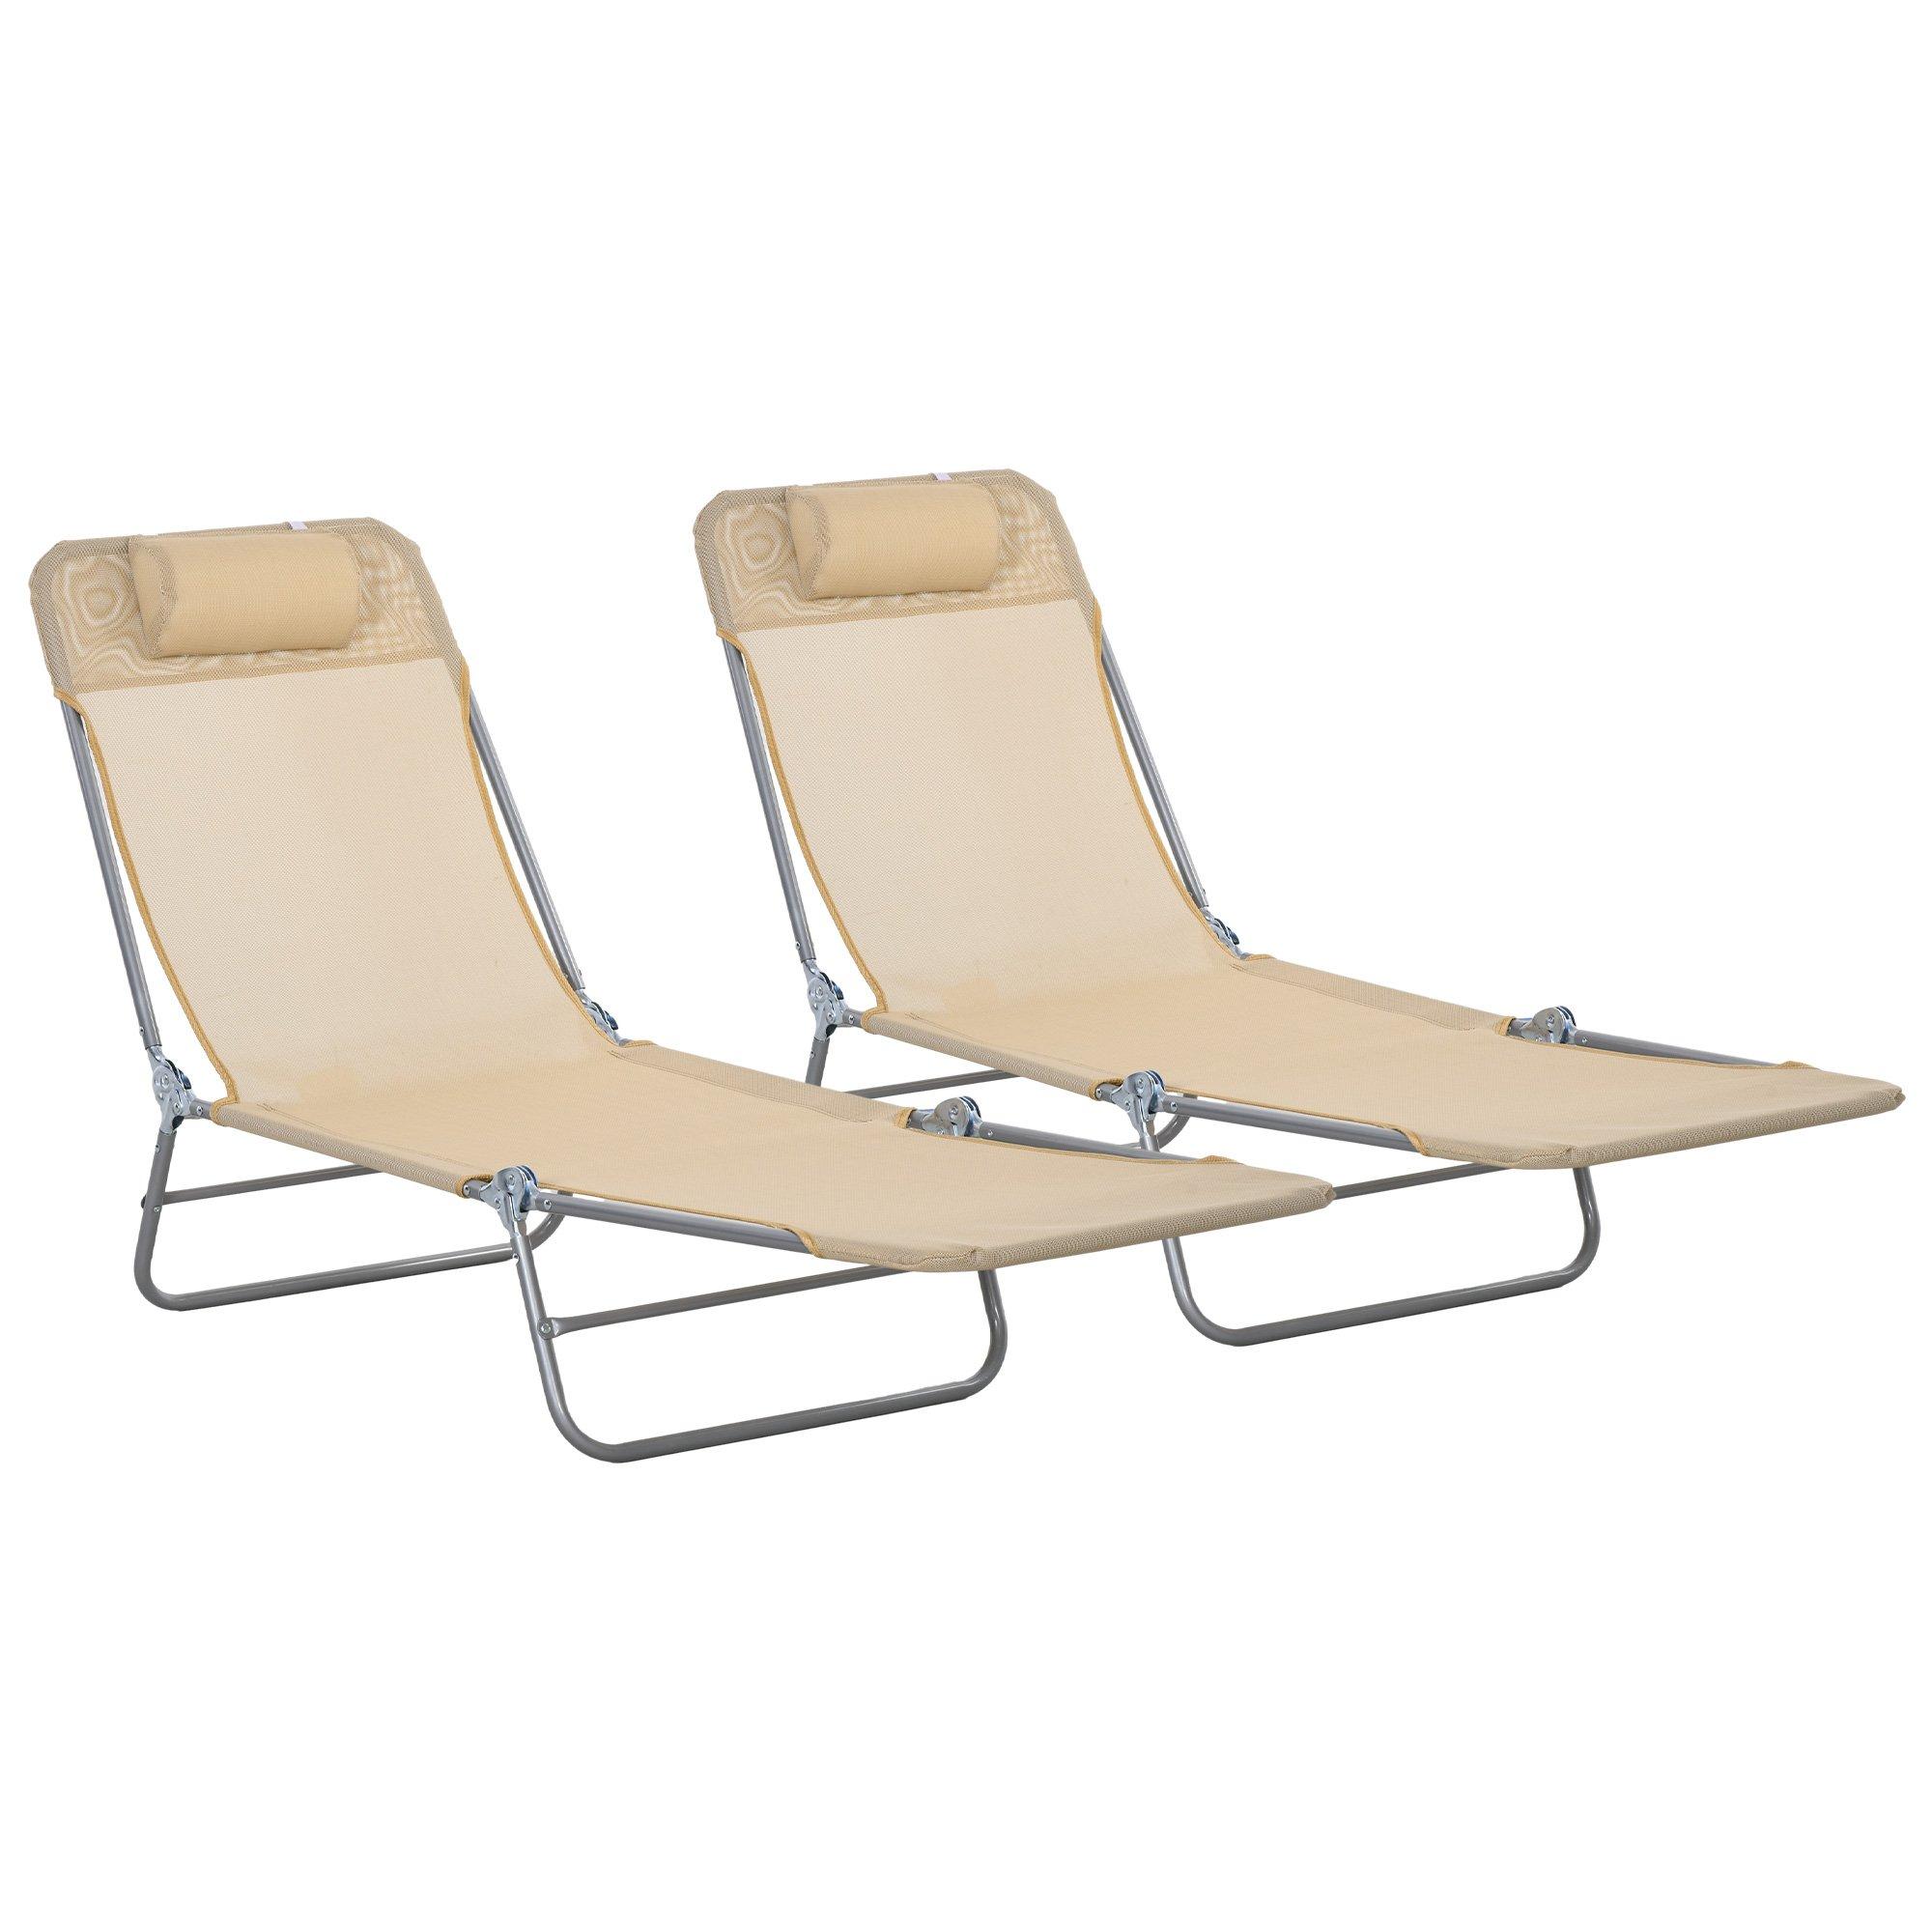 Outdoor Foldable Sun Loungers Set of 2 with 6 Level Adjustable Backrest Brown